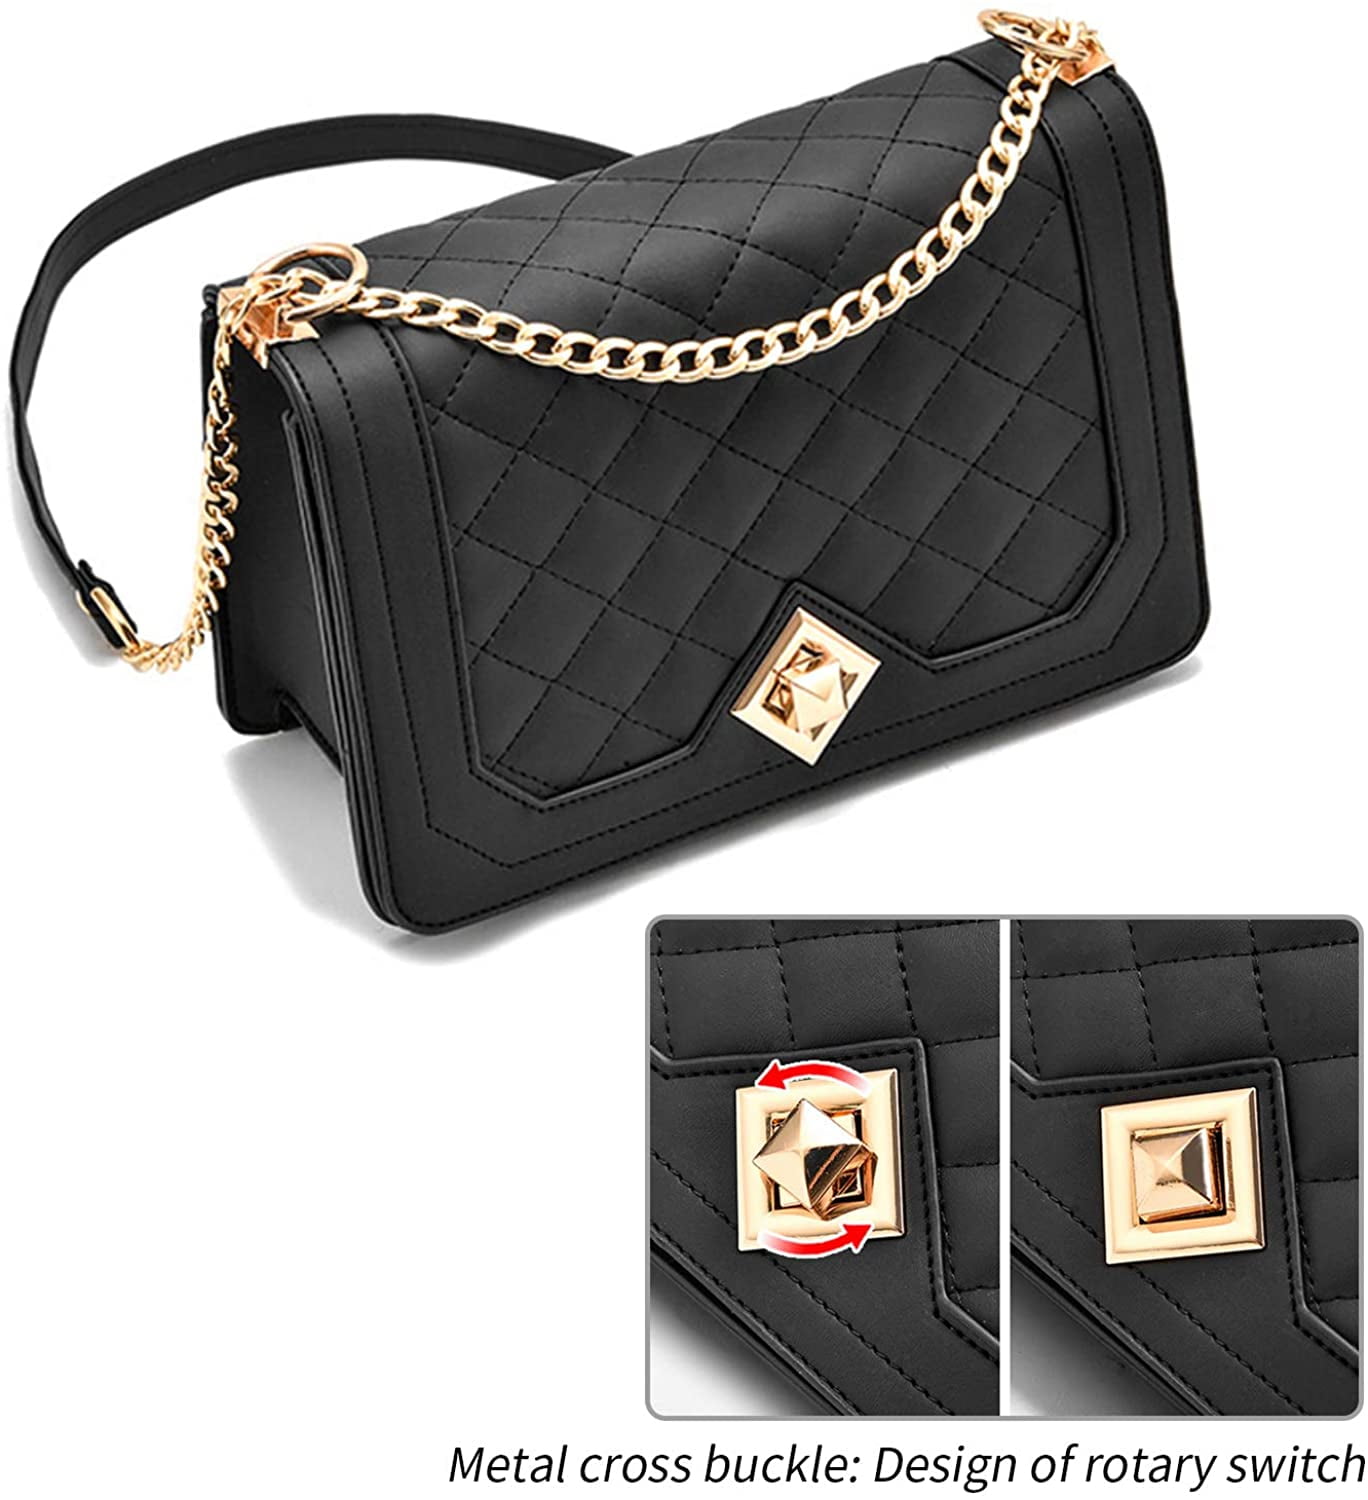 Crossbody Bags for Women Small Handbags PU Leather Shoulder Bag Ladies  Purse Evening Bag Quilted Satchels with Chain Strap,black，G168333